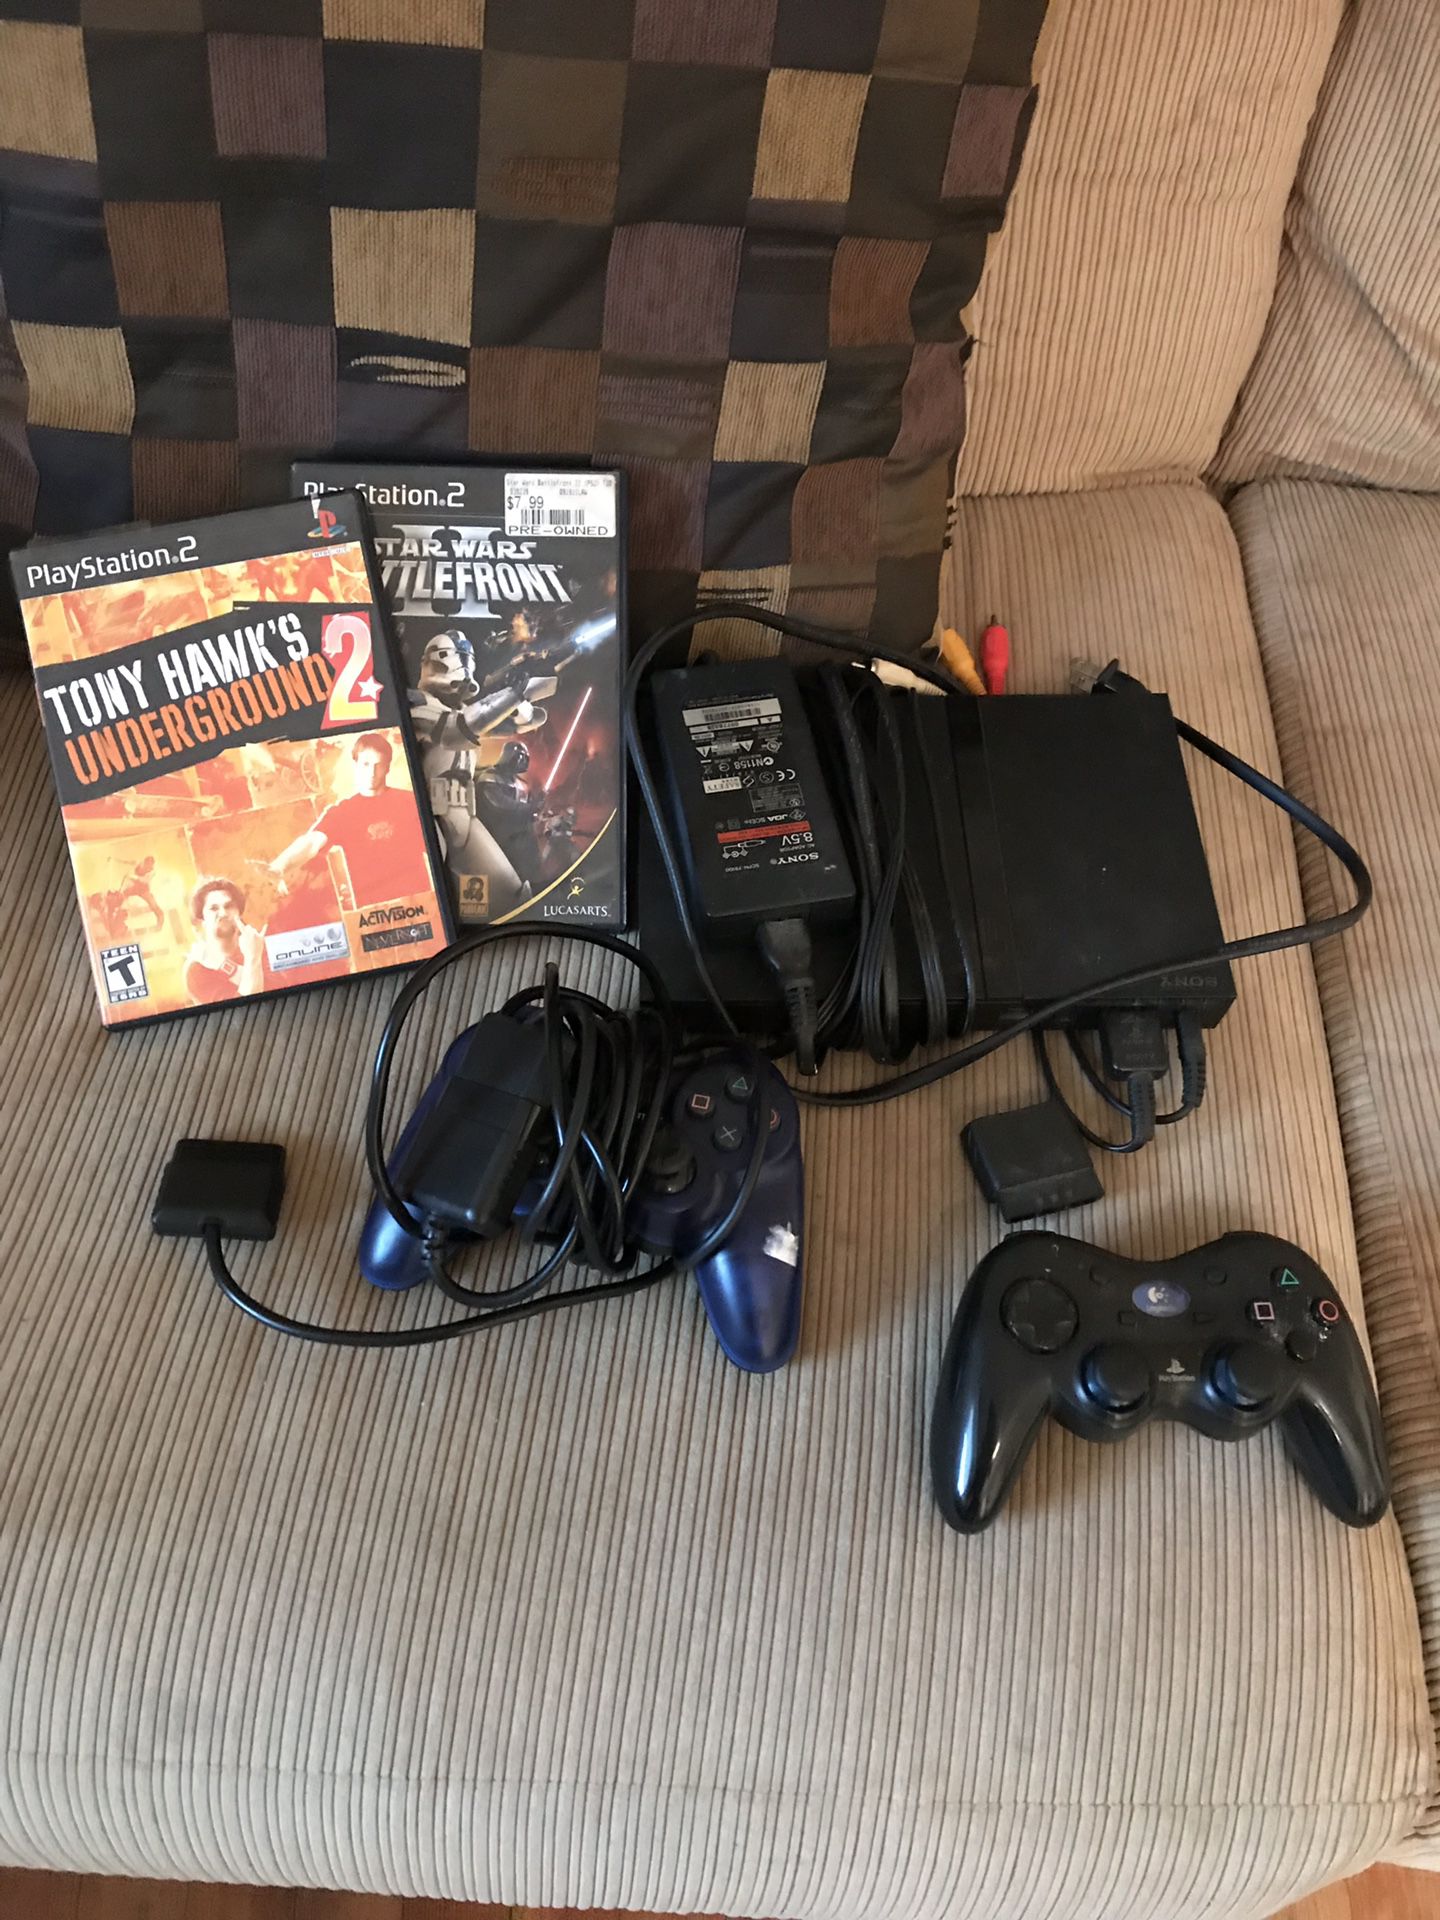 PlayStation 2 with 2 games